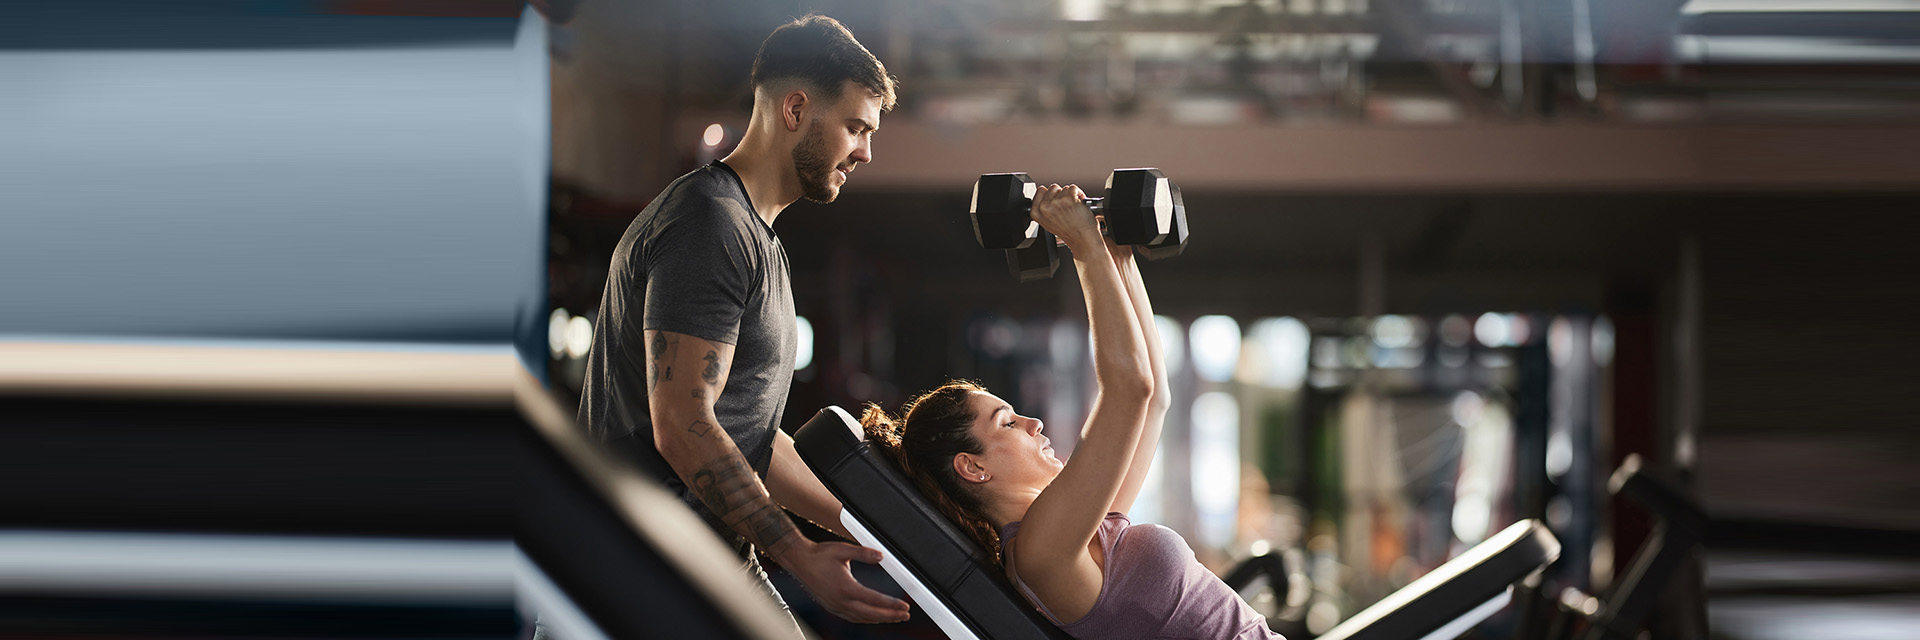 Woman working out with trainer